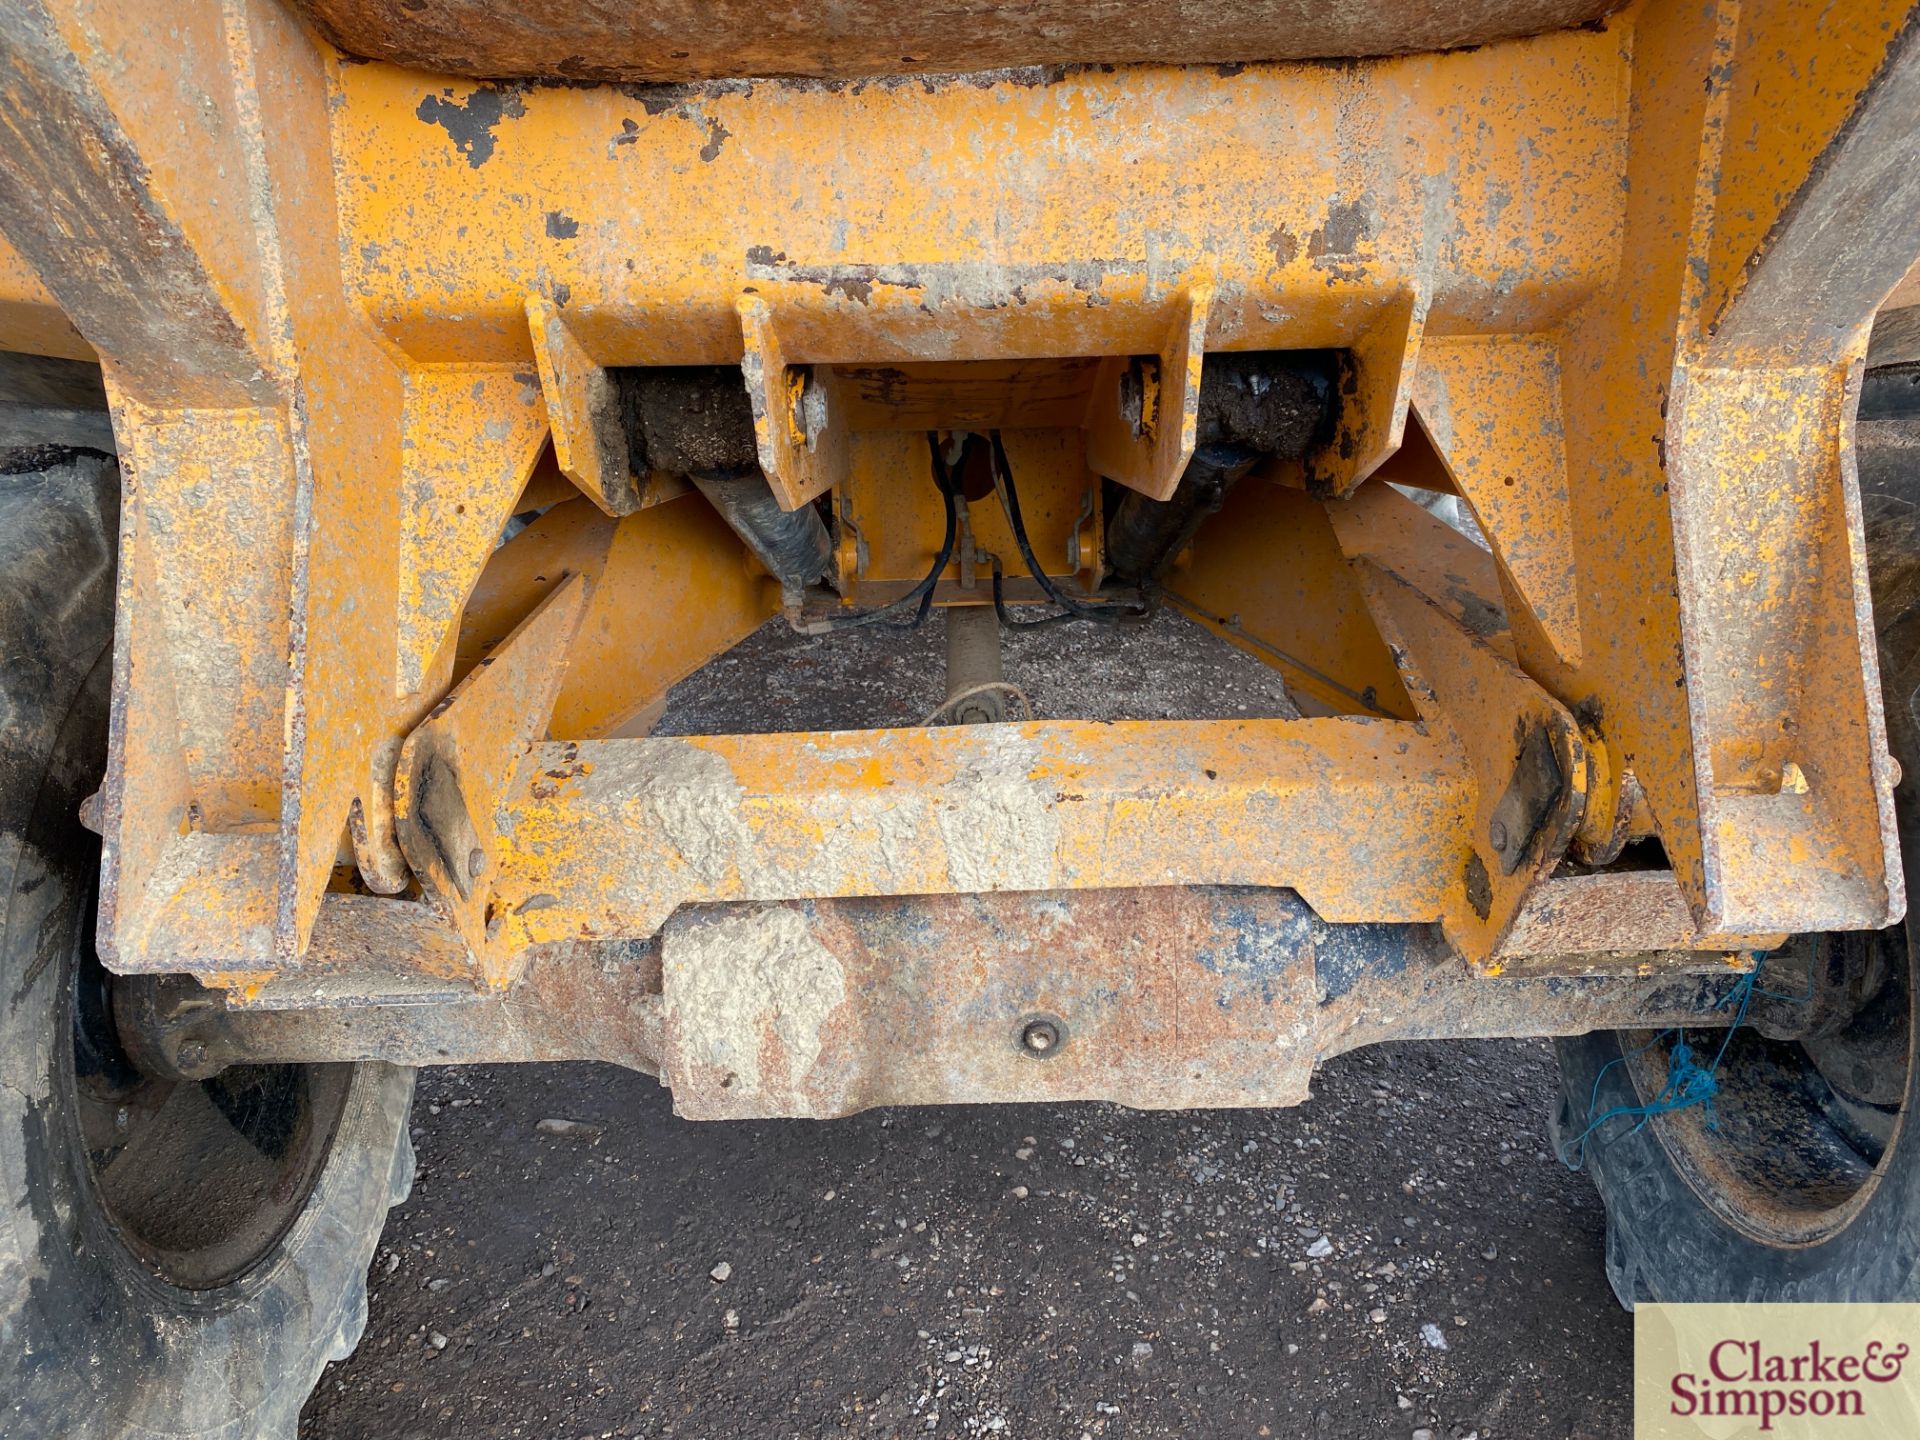 Benford 6T 4WD pivot steer dumper. 2000. Serial number SLBDNOOEY7H0721. 405/70R20 wheels and - Image 22 of 36